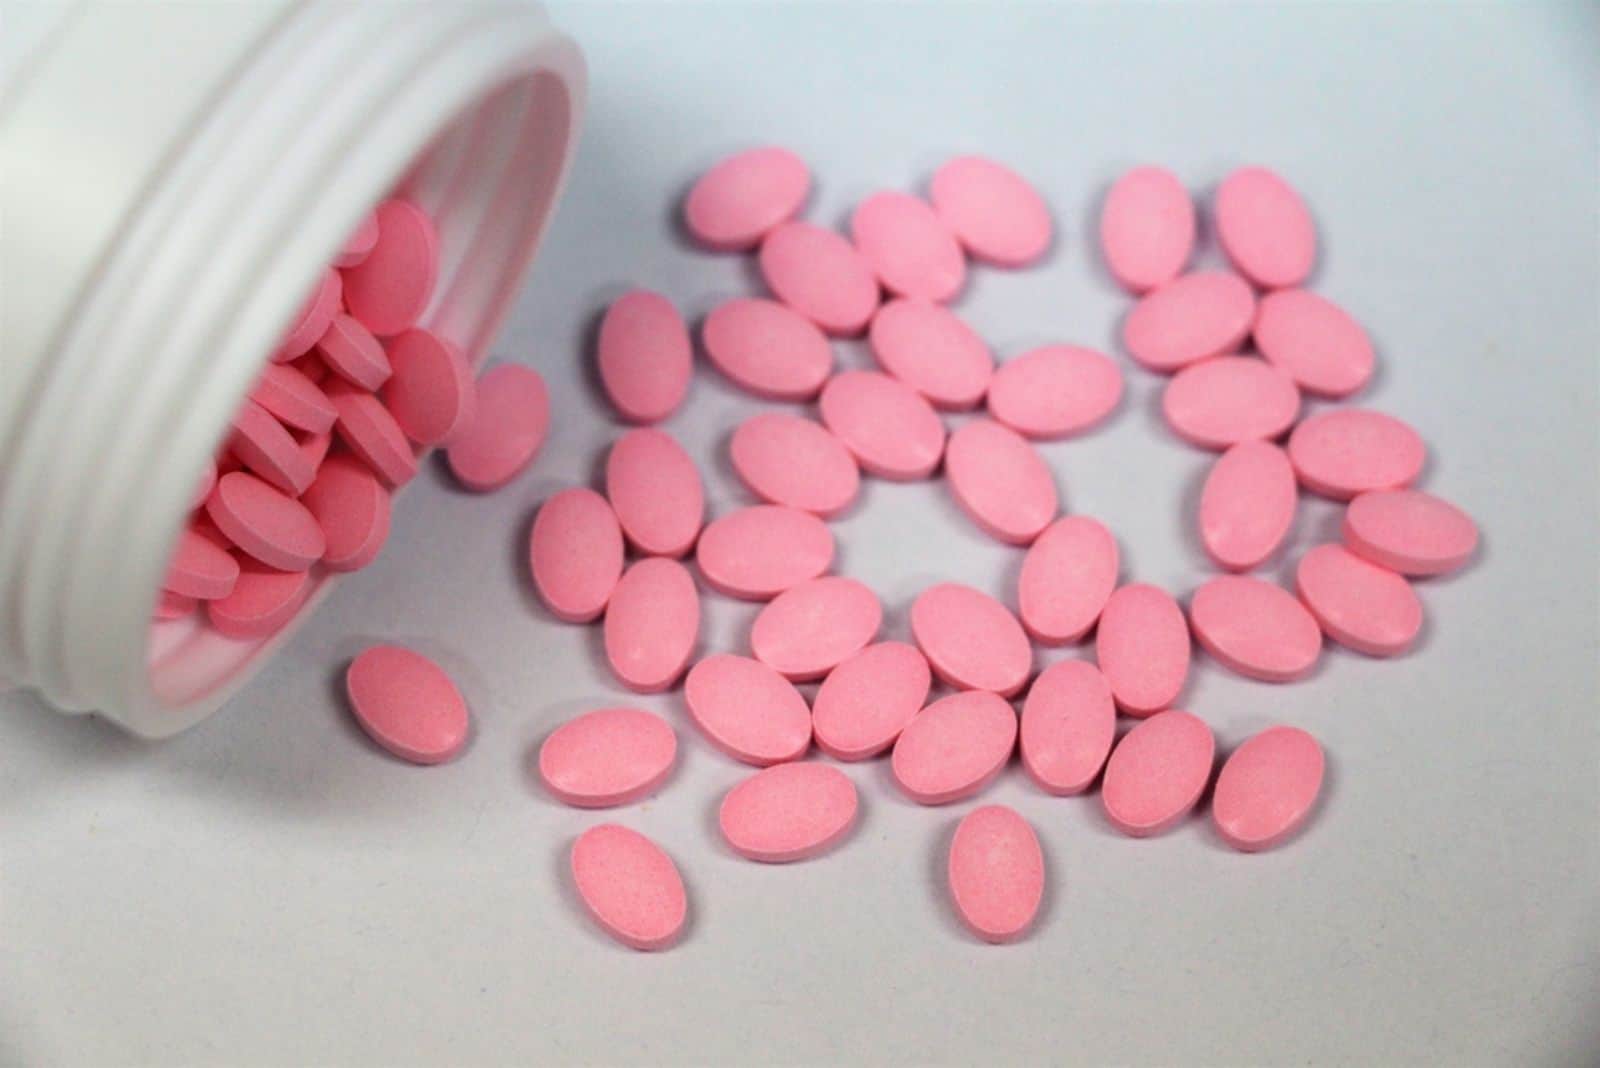 Top view of pink tablets on white background